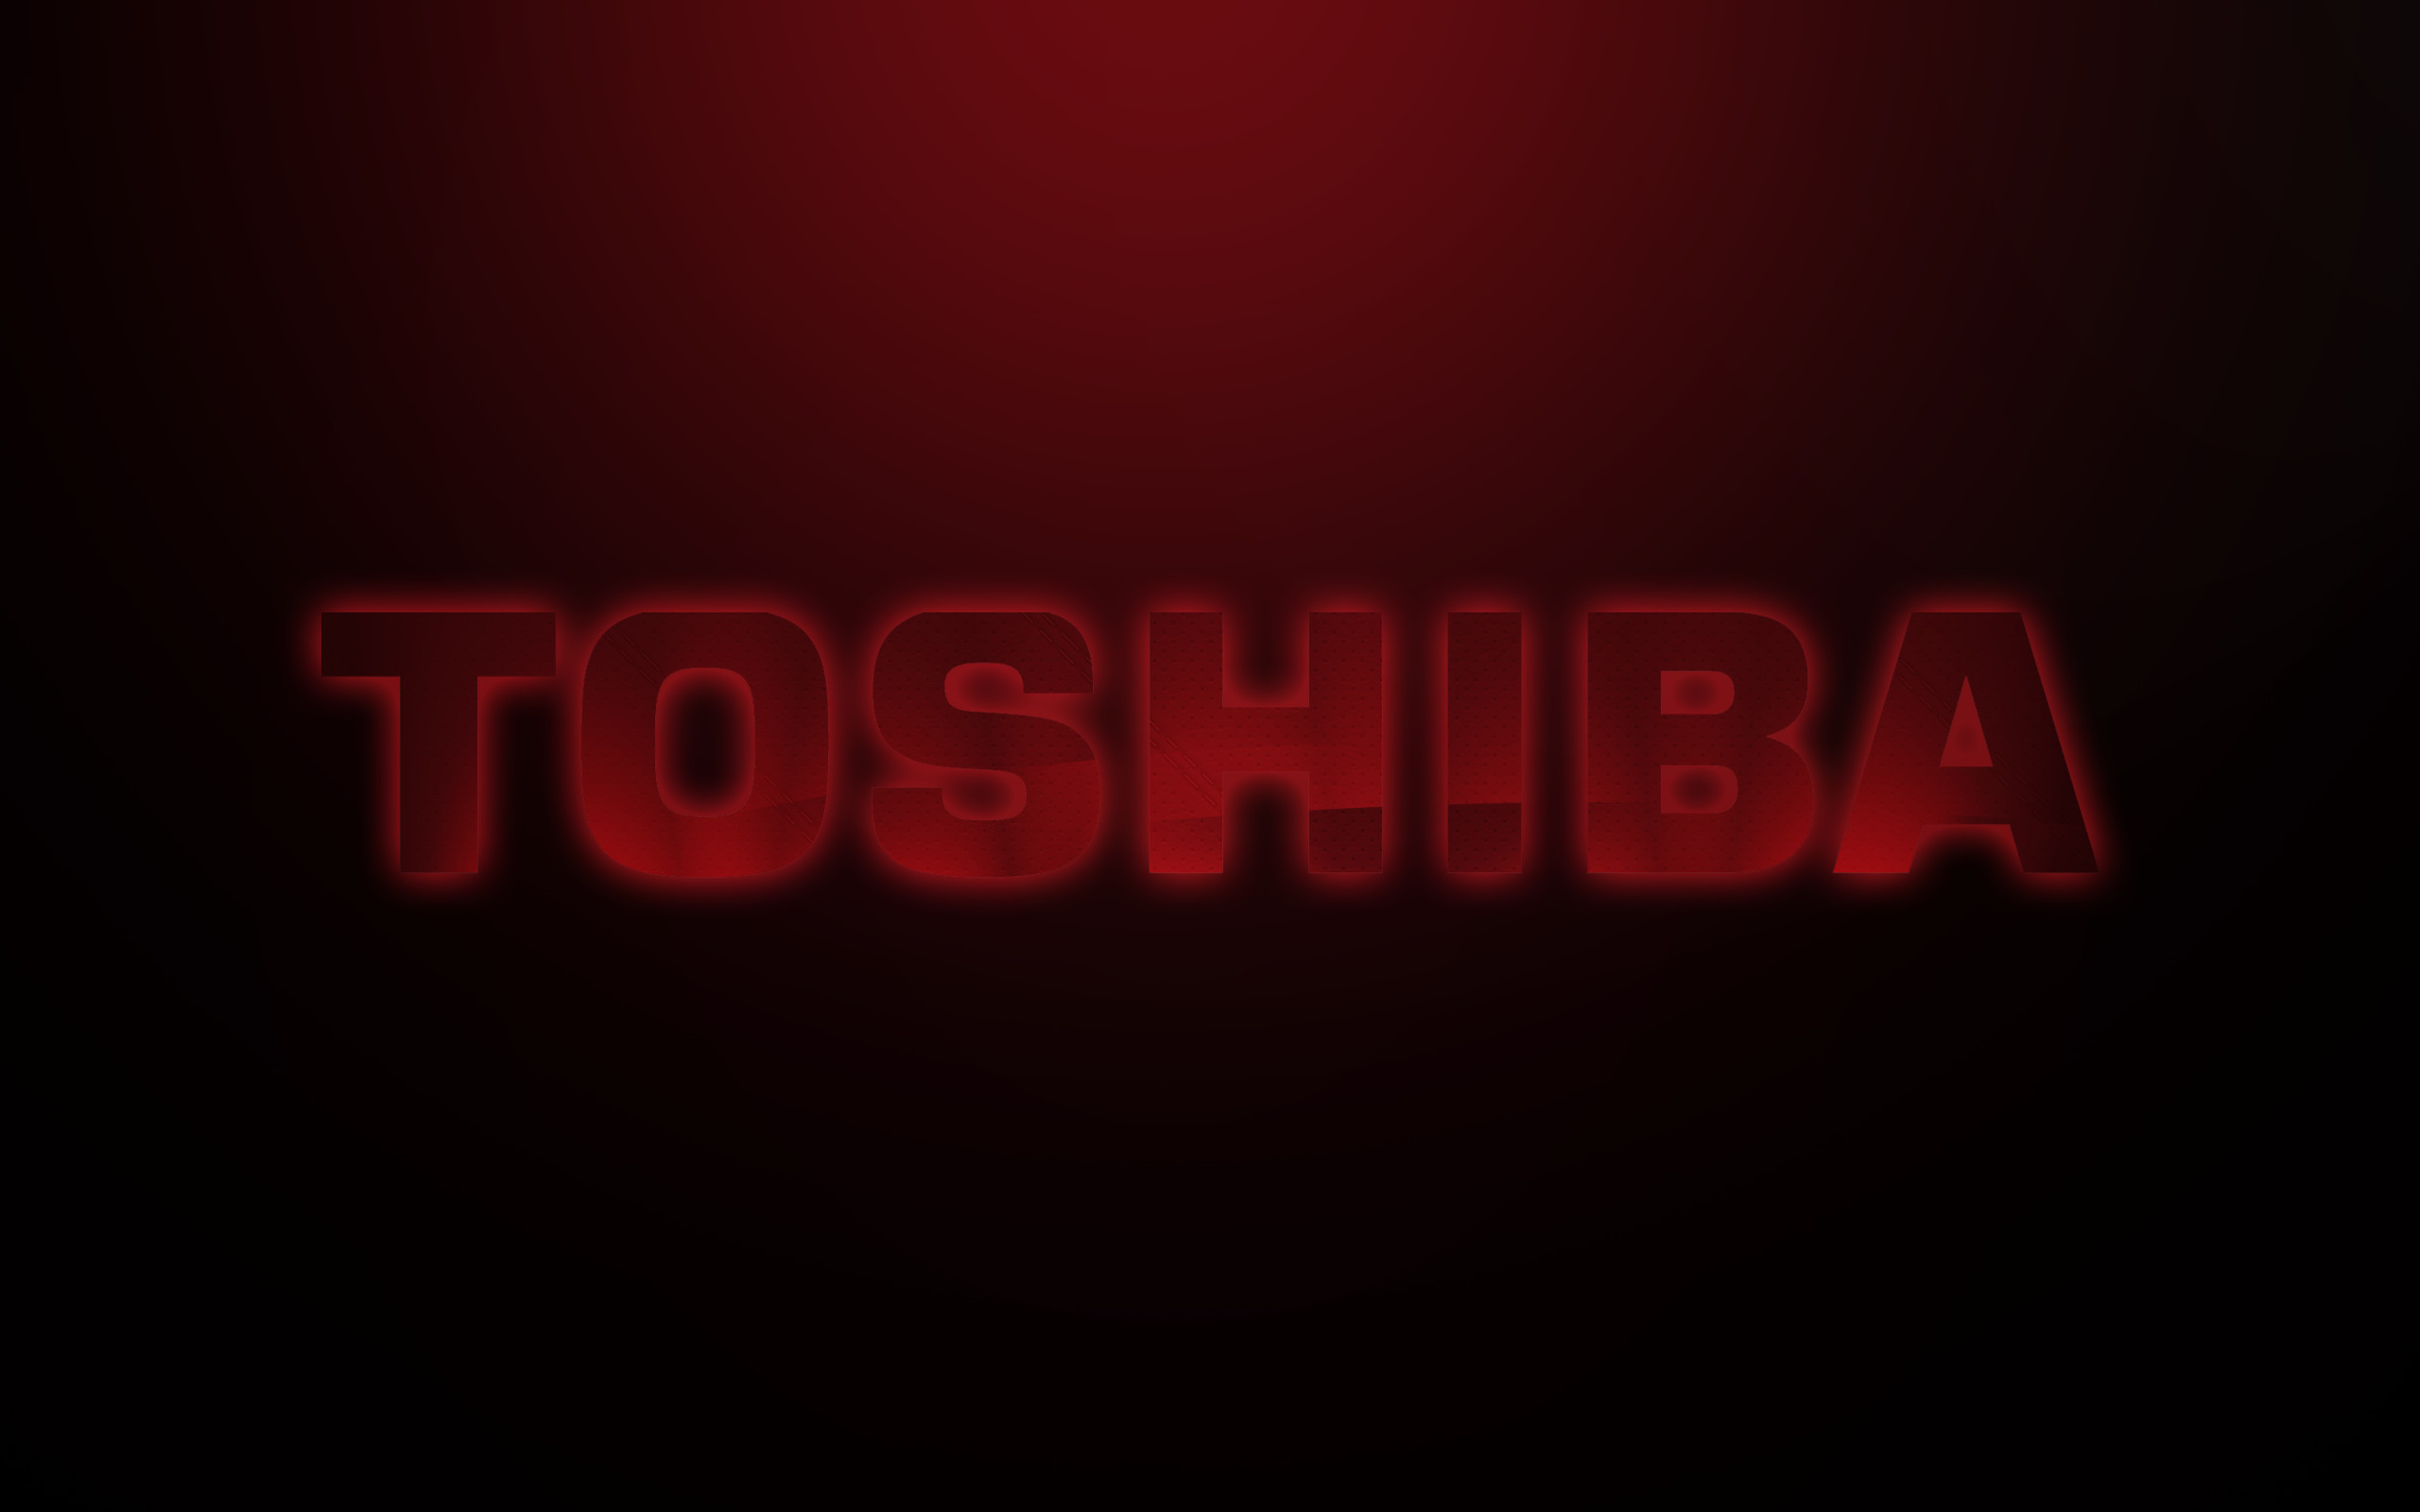 2560x1600 Toshiba Wallpaper by OwlServices.png 17009